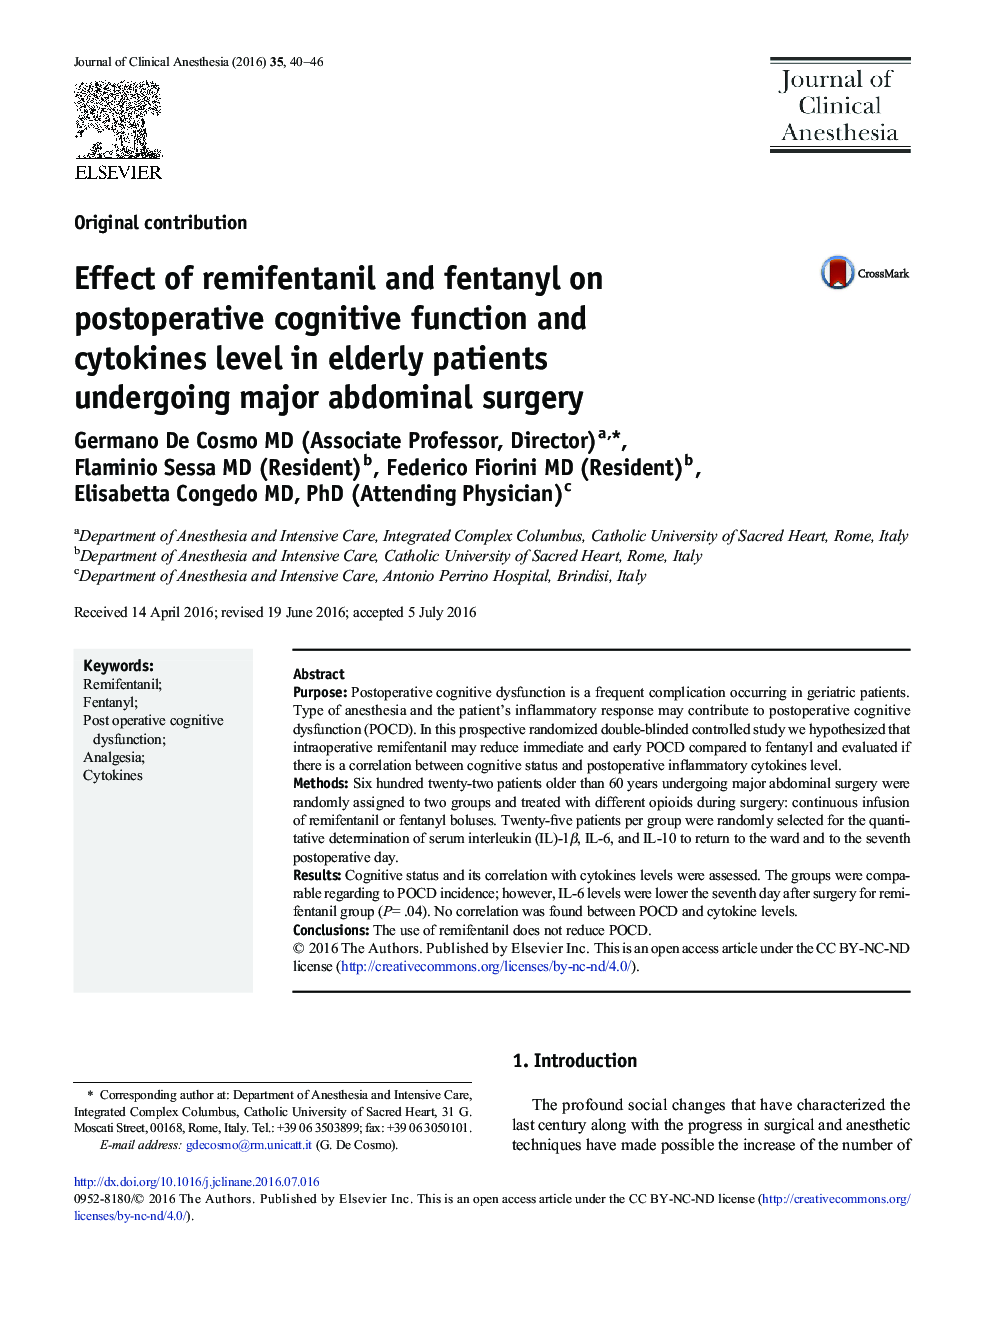 Effect of remifentanil and fentanyl on postoperative cognitive function and cytokines level in elderly patients undergoing major abdominal surgery